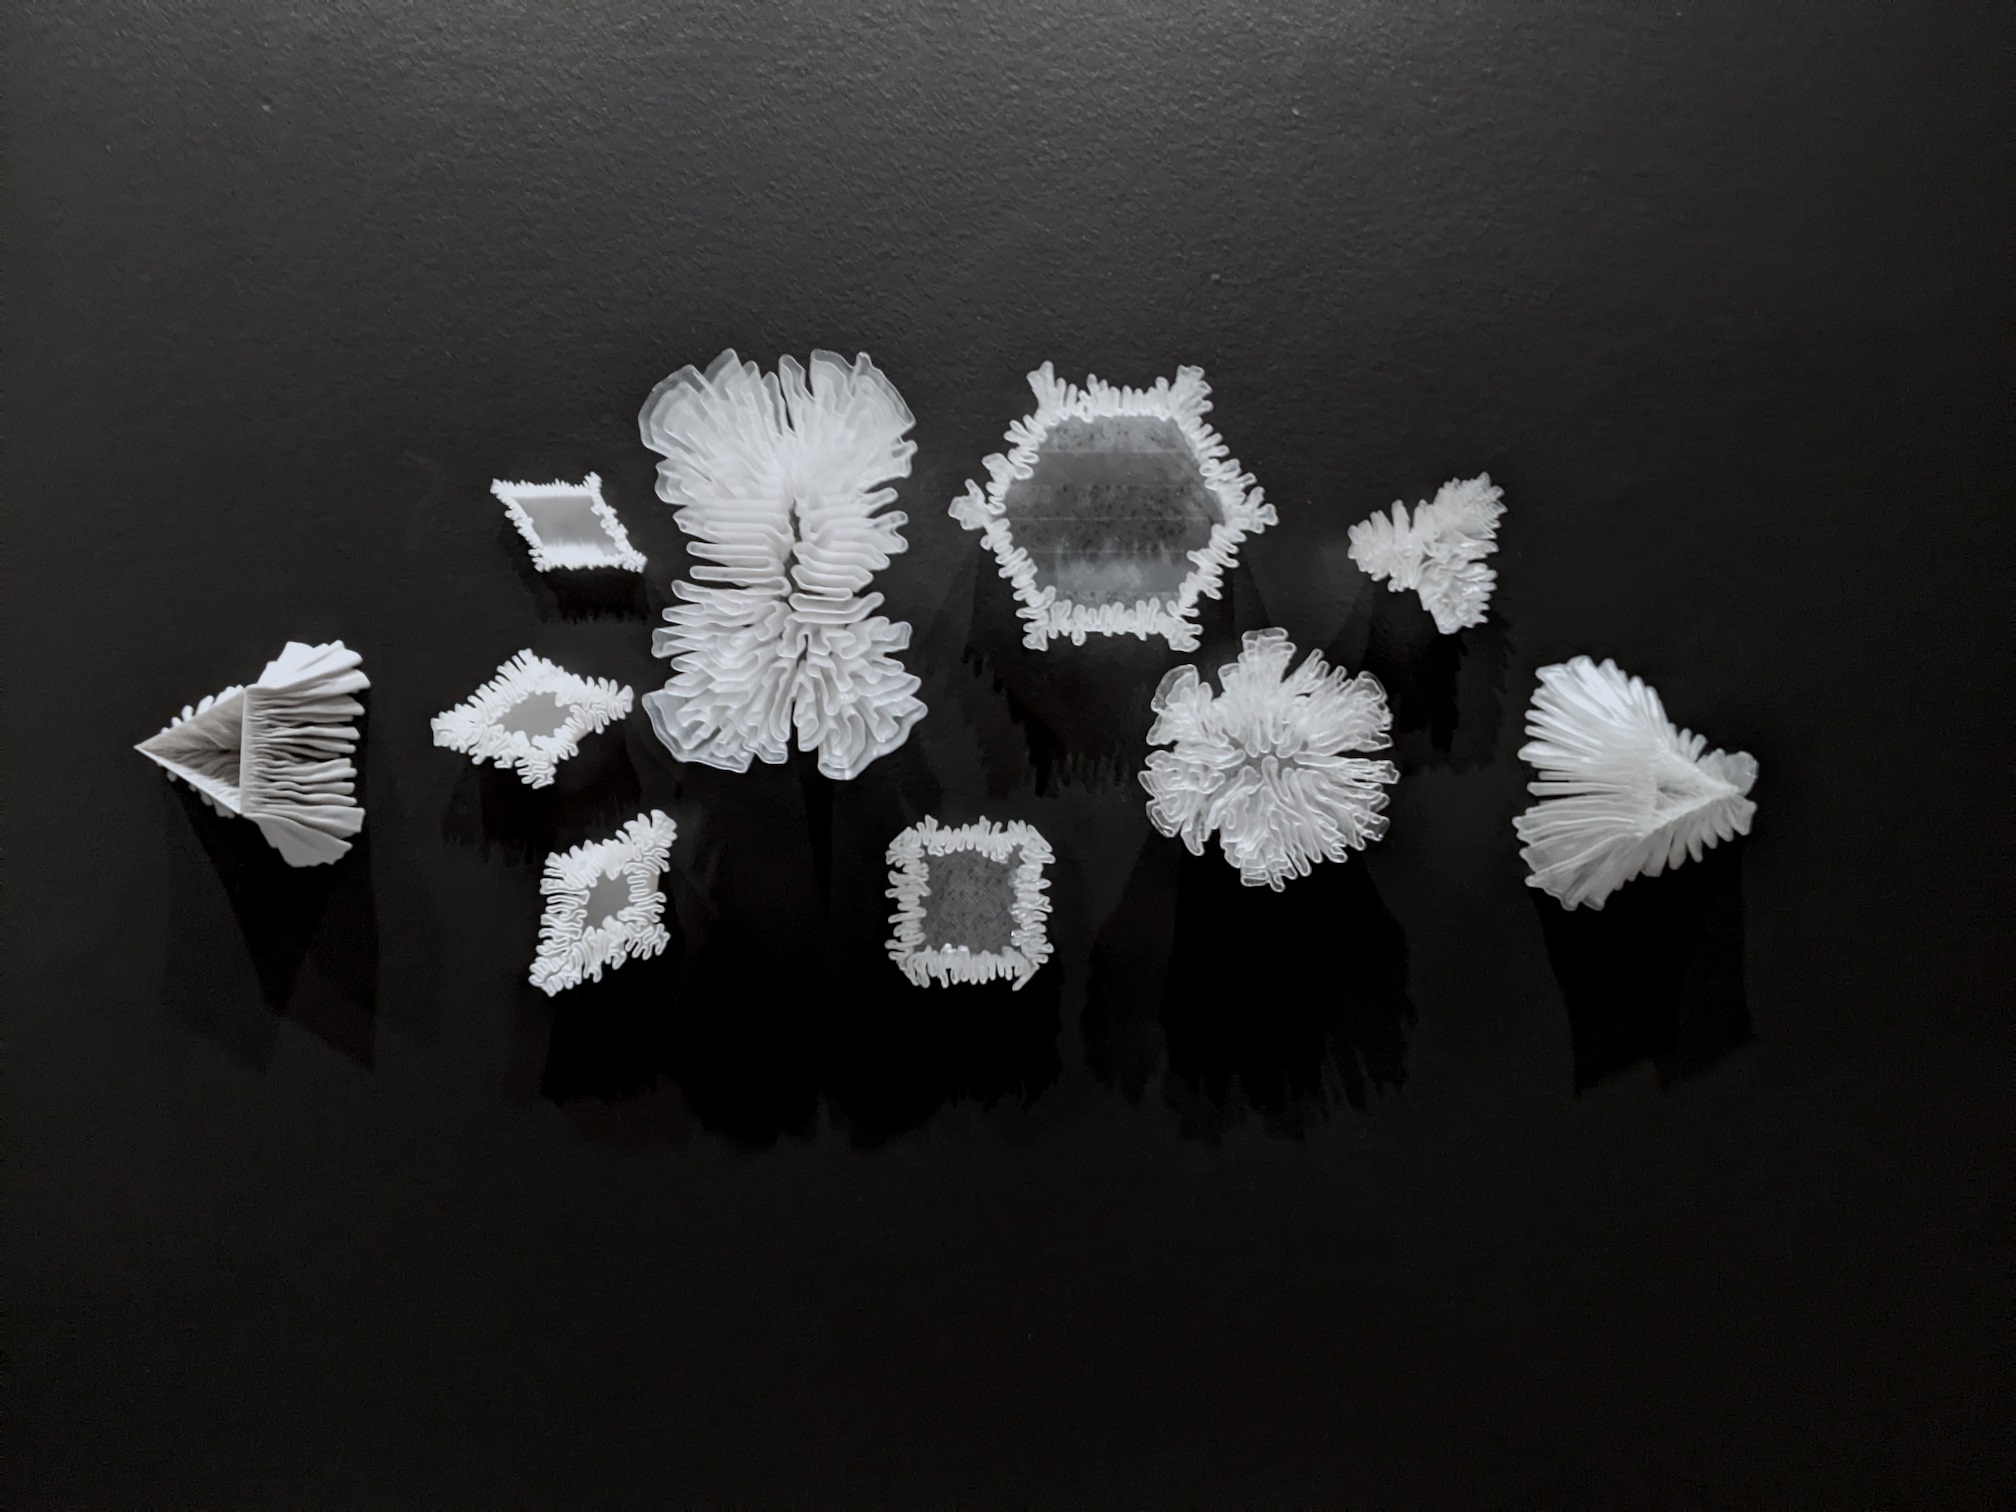 A collection of 3D printed objects in white on a black background.